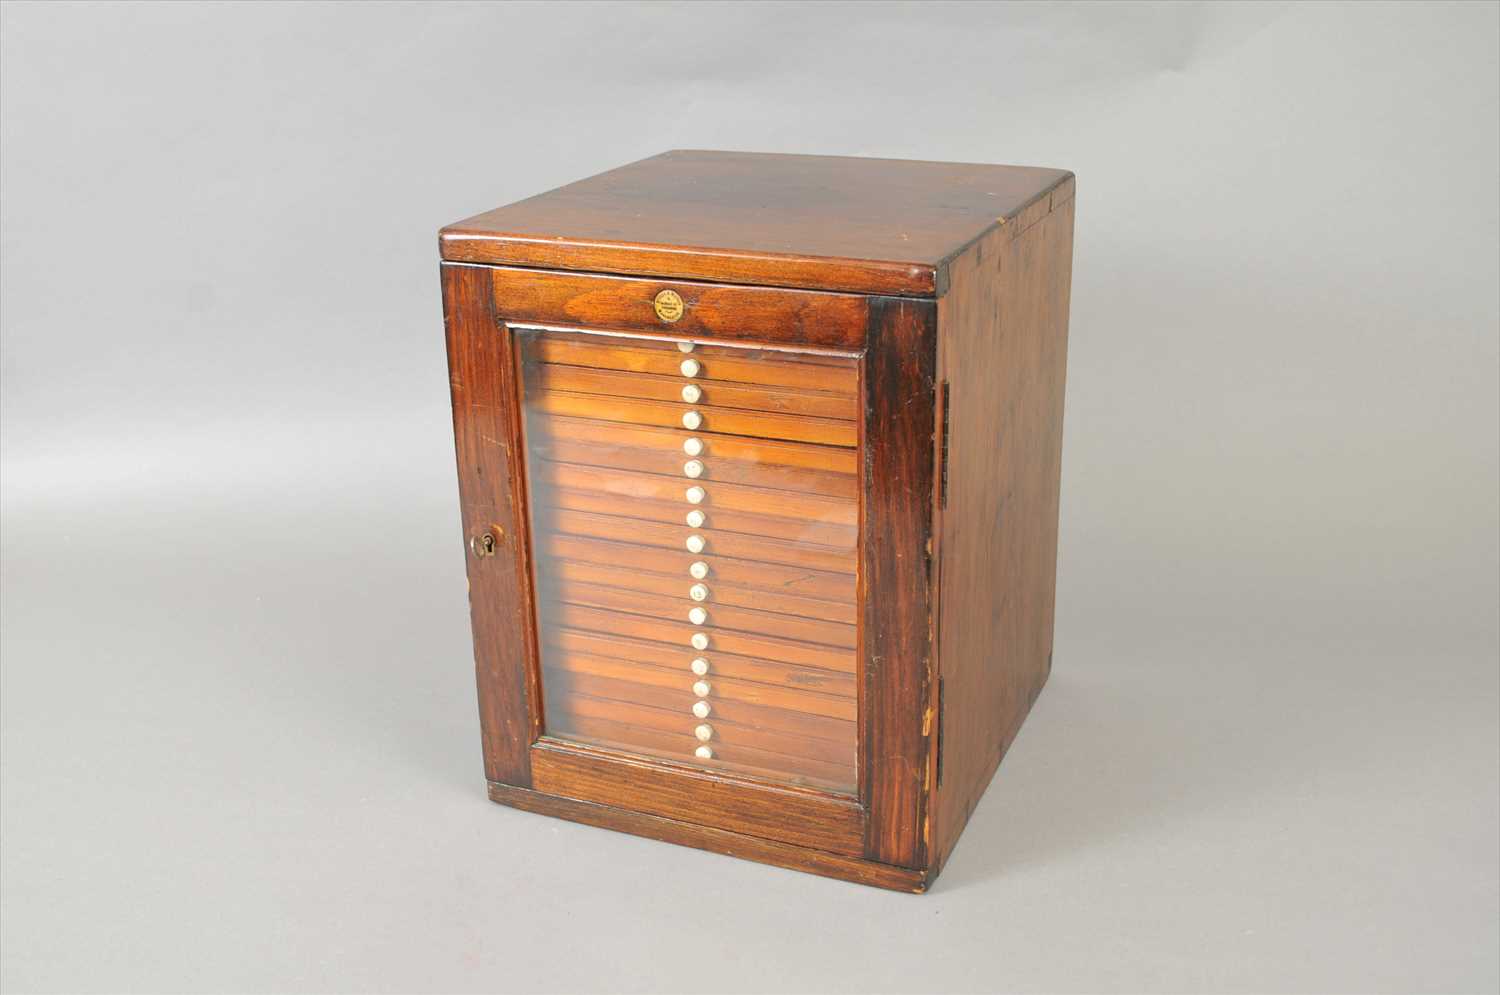 An early 20th century mahogany coin collector's cabinet, 'Stokes & Watson, Manchester'